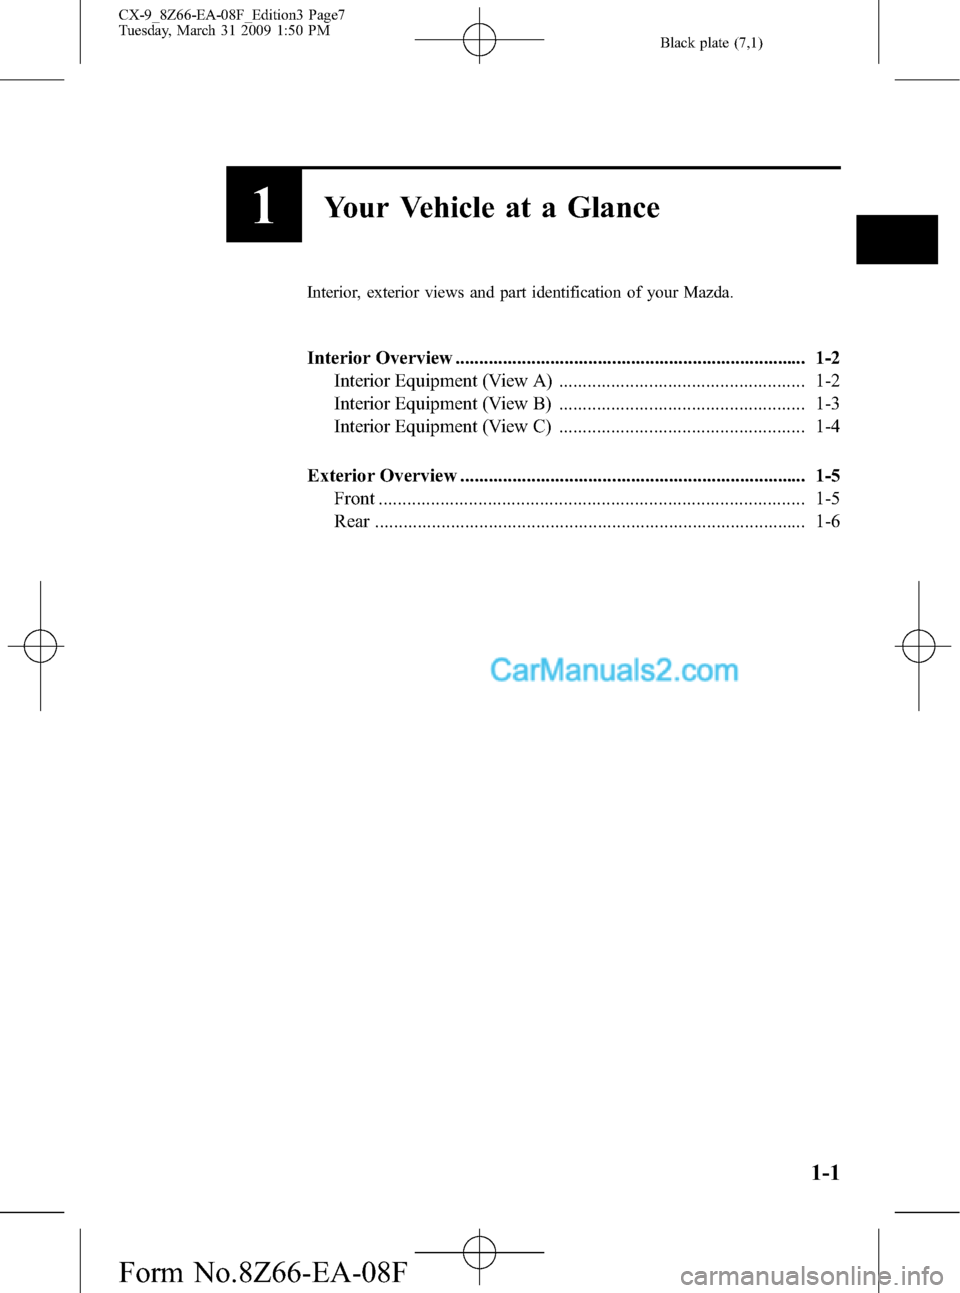 MAZDA MODEL CX-9 2009  Owners Manual (in English) Black plate (7,1)
1Your Vehicle at a Glance
Interior, exterior views and part identification of your Mazda.
Interior Overview ..........................................................................